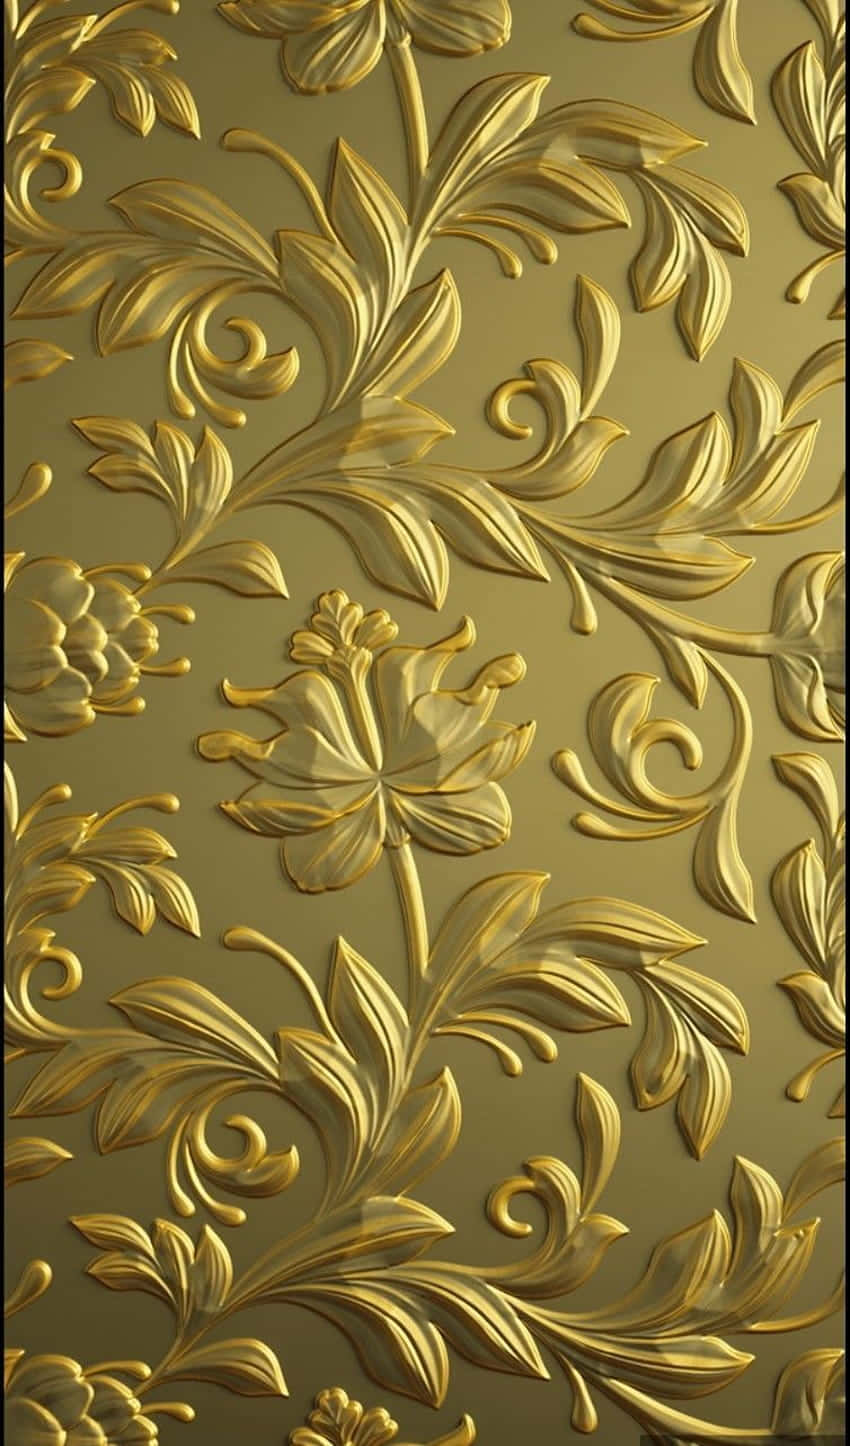 "Classy and Elegant, Make your Background Shine with Gold"